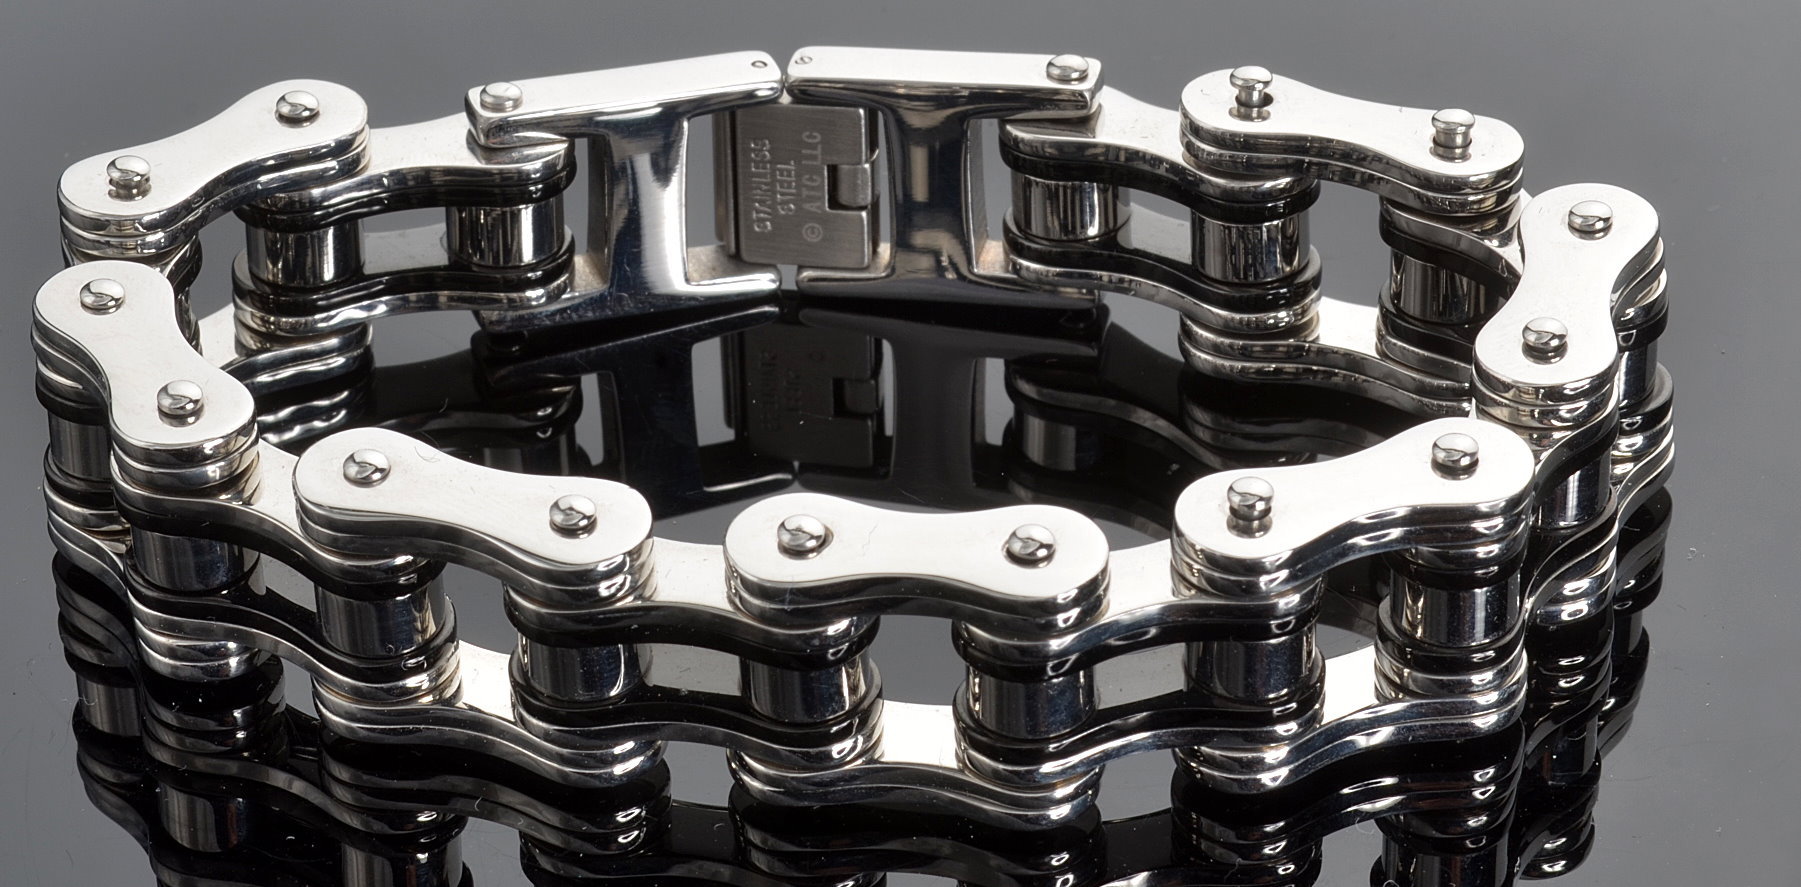 The development history and application of roller chains